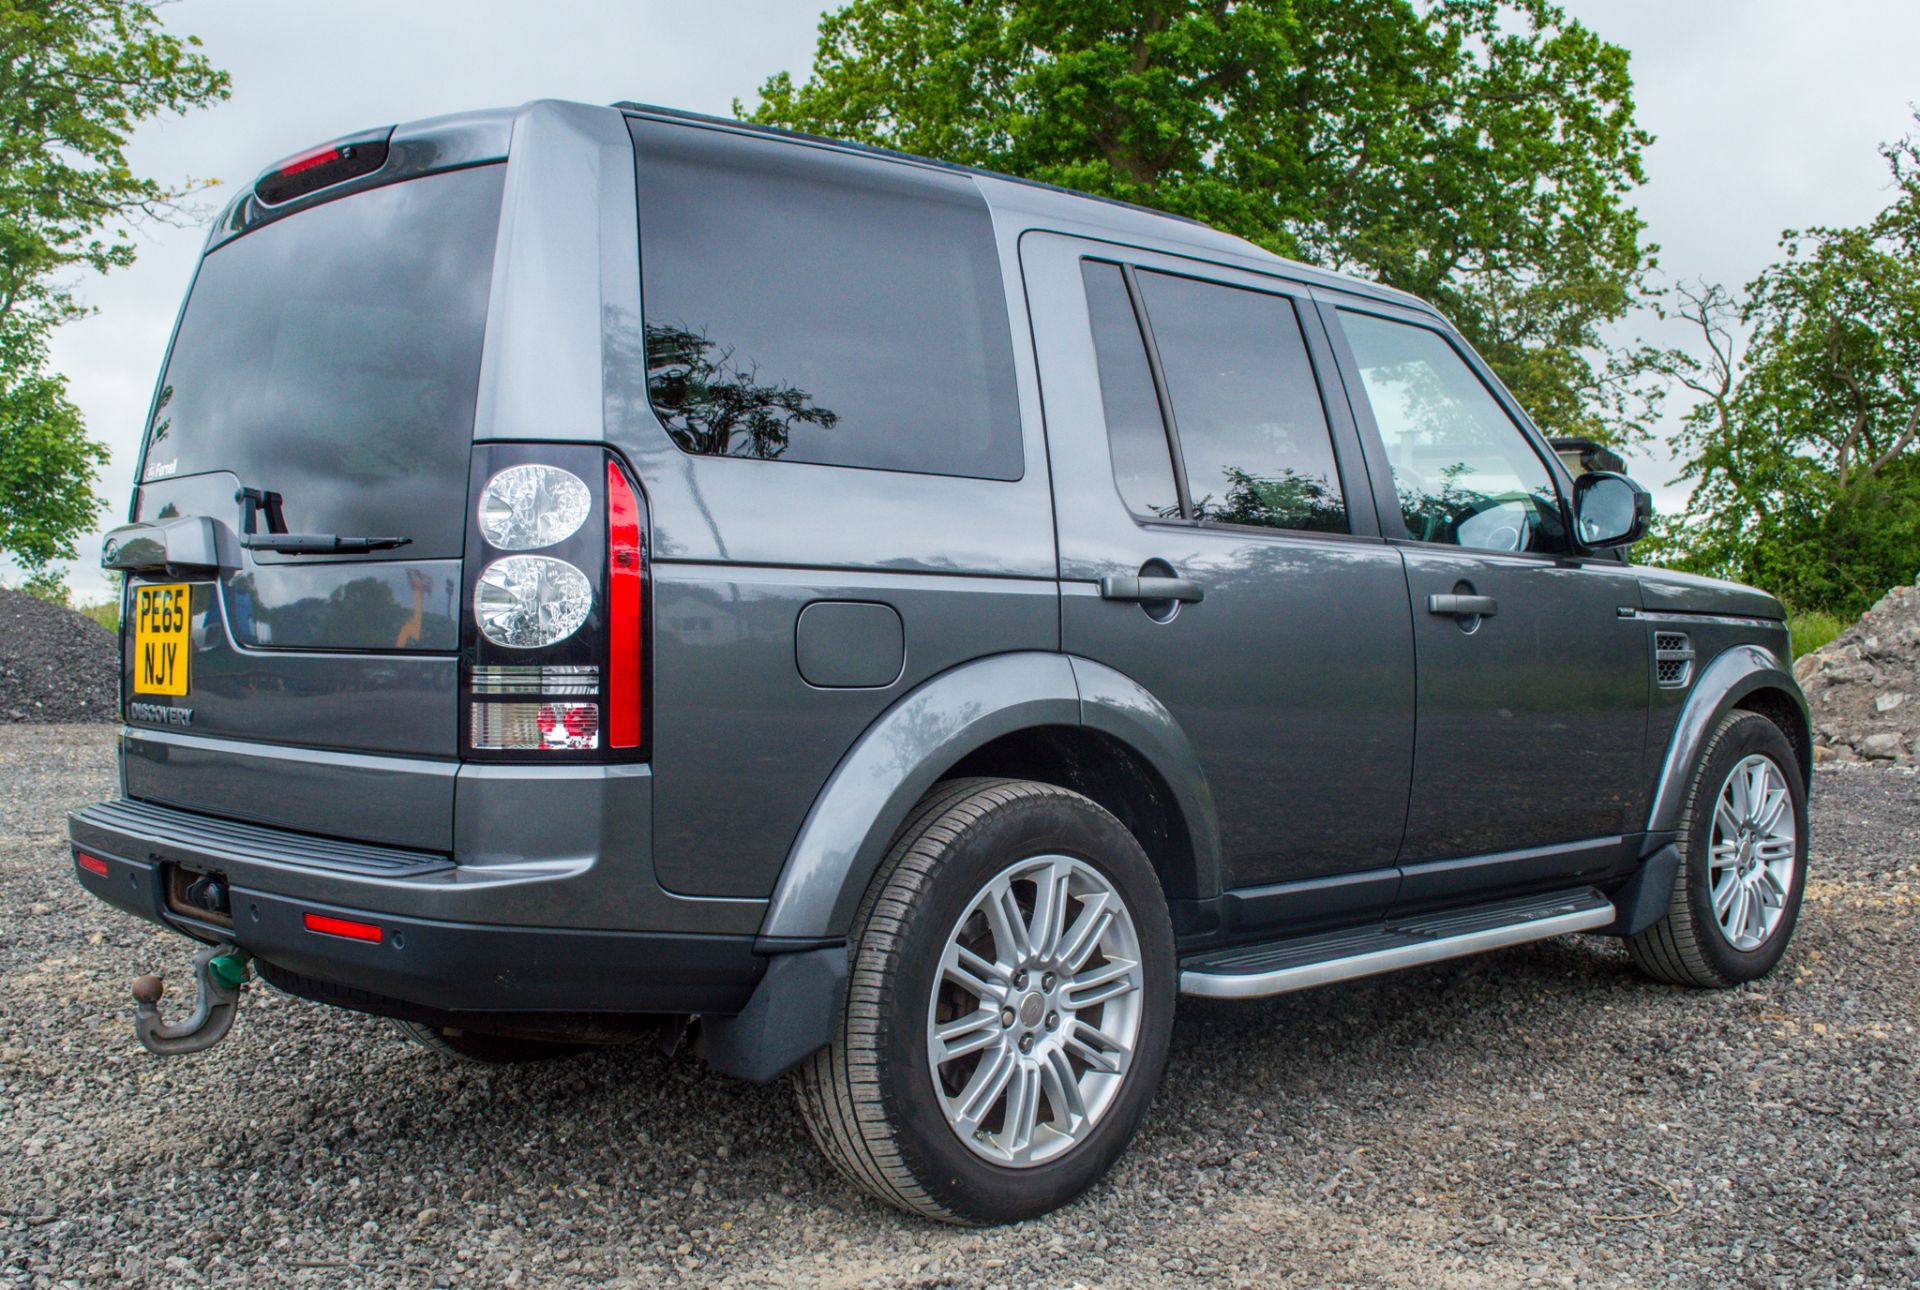 Land Rover Discovery 4 SE 3.0 TDV6 Commercial 4 wheel drive utility vehicle  Reg No: PE 65 NJY  Date - Image 3 of 23